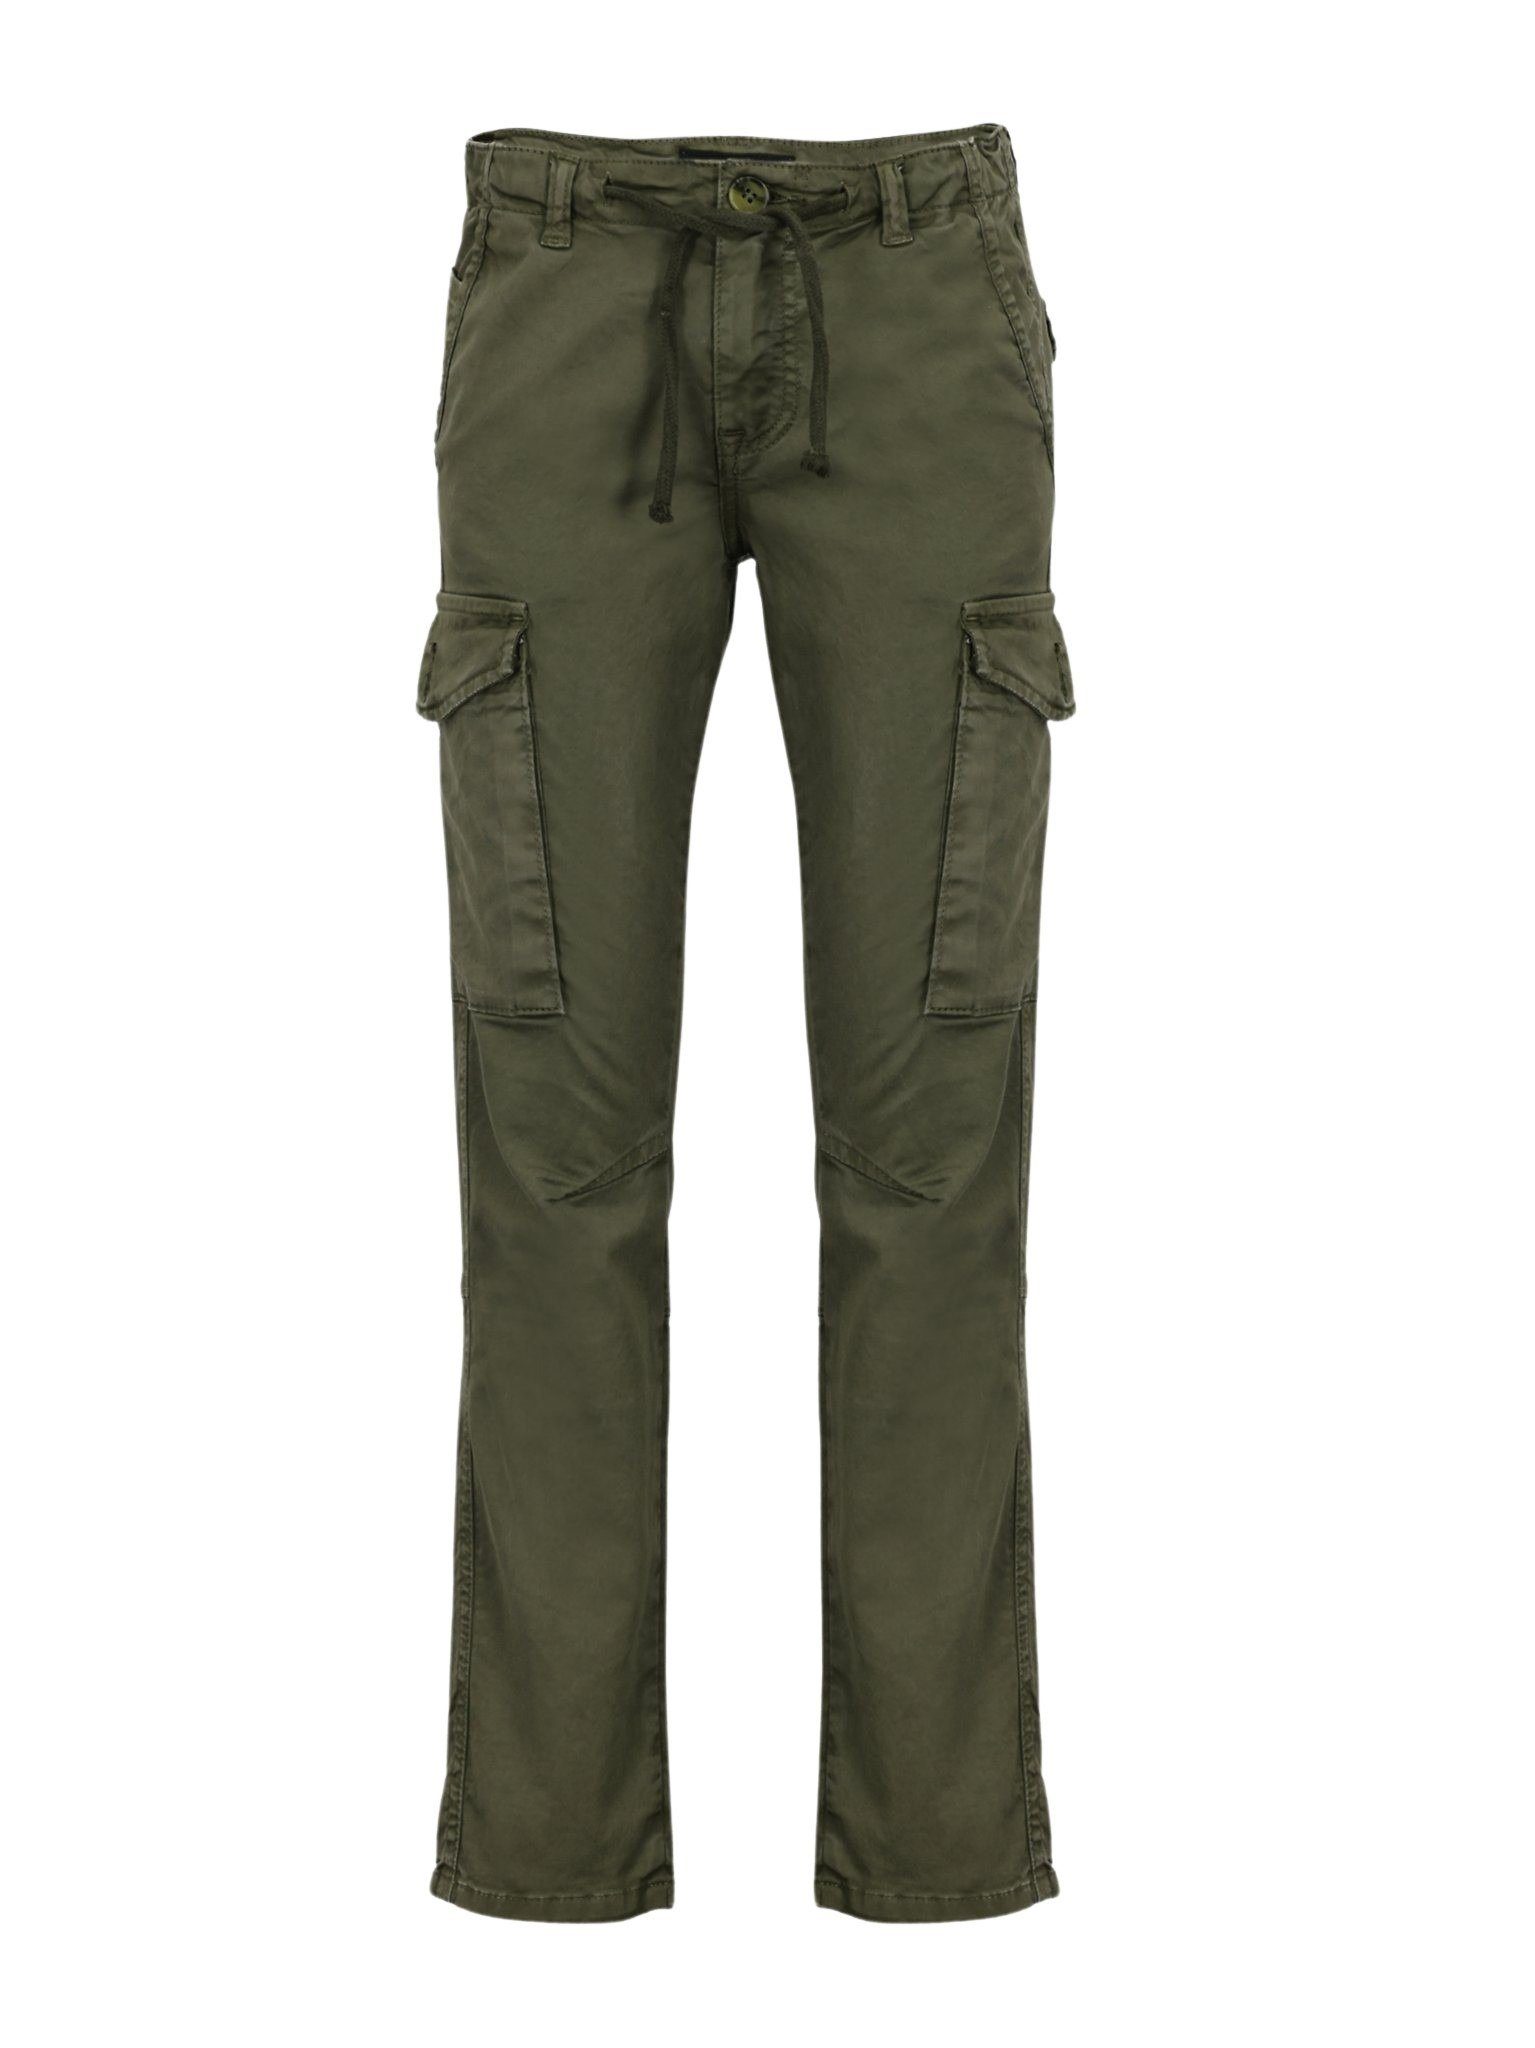 LTB Outdoorhose Gebozo Dusty Olive Pants LTB